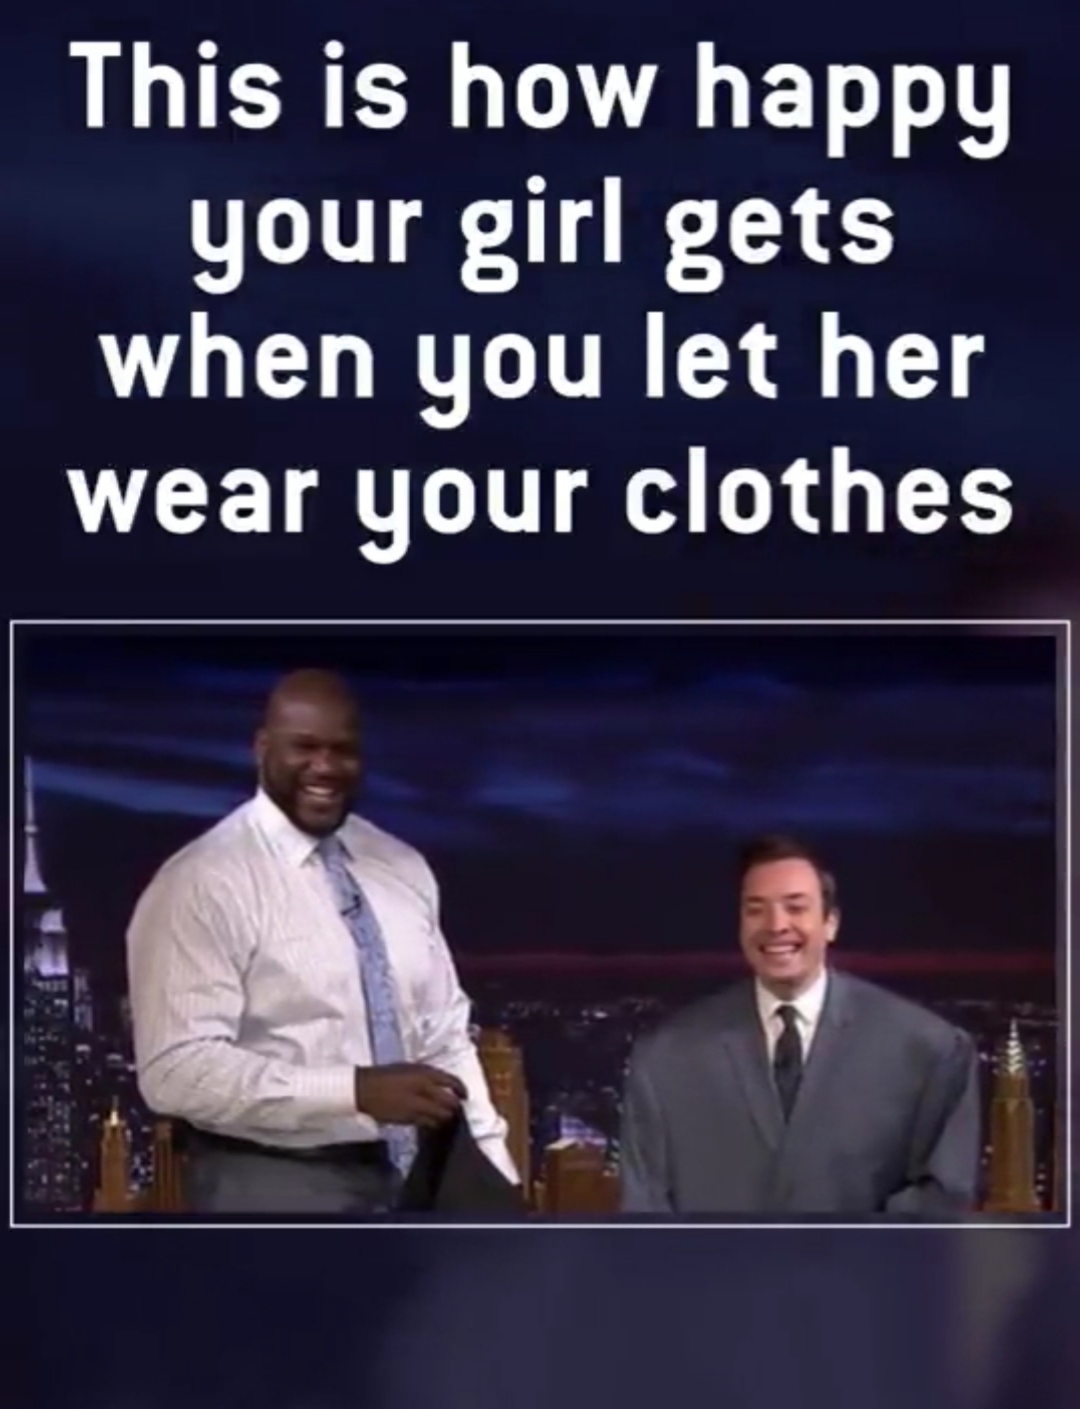 jimmy fallon in shaqs coat - This is how happy your girl gets when you let her wear your clothes